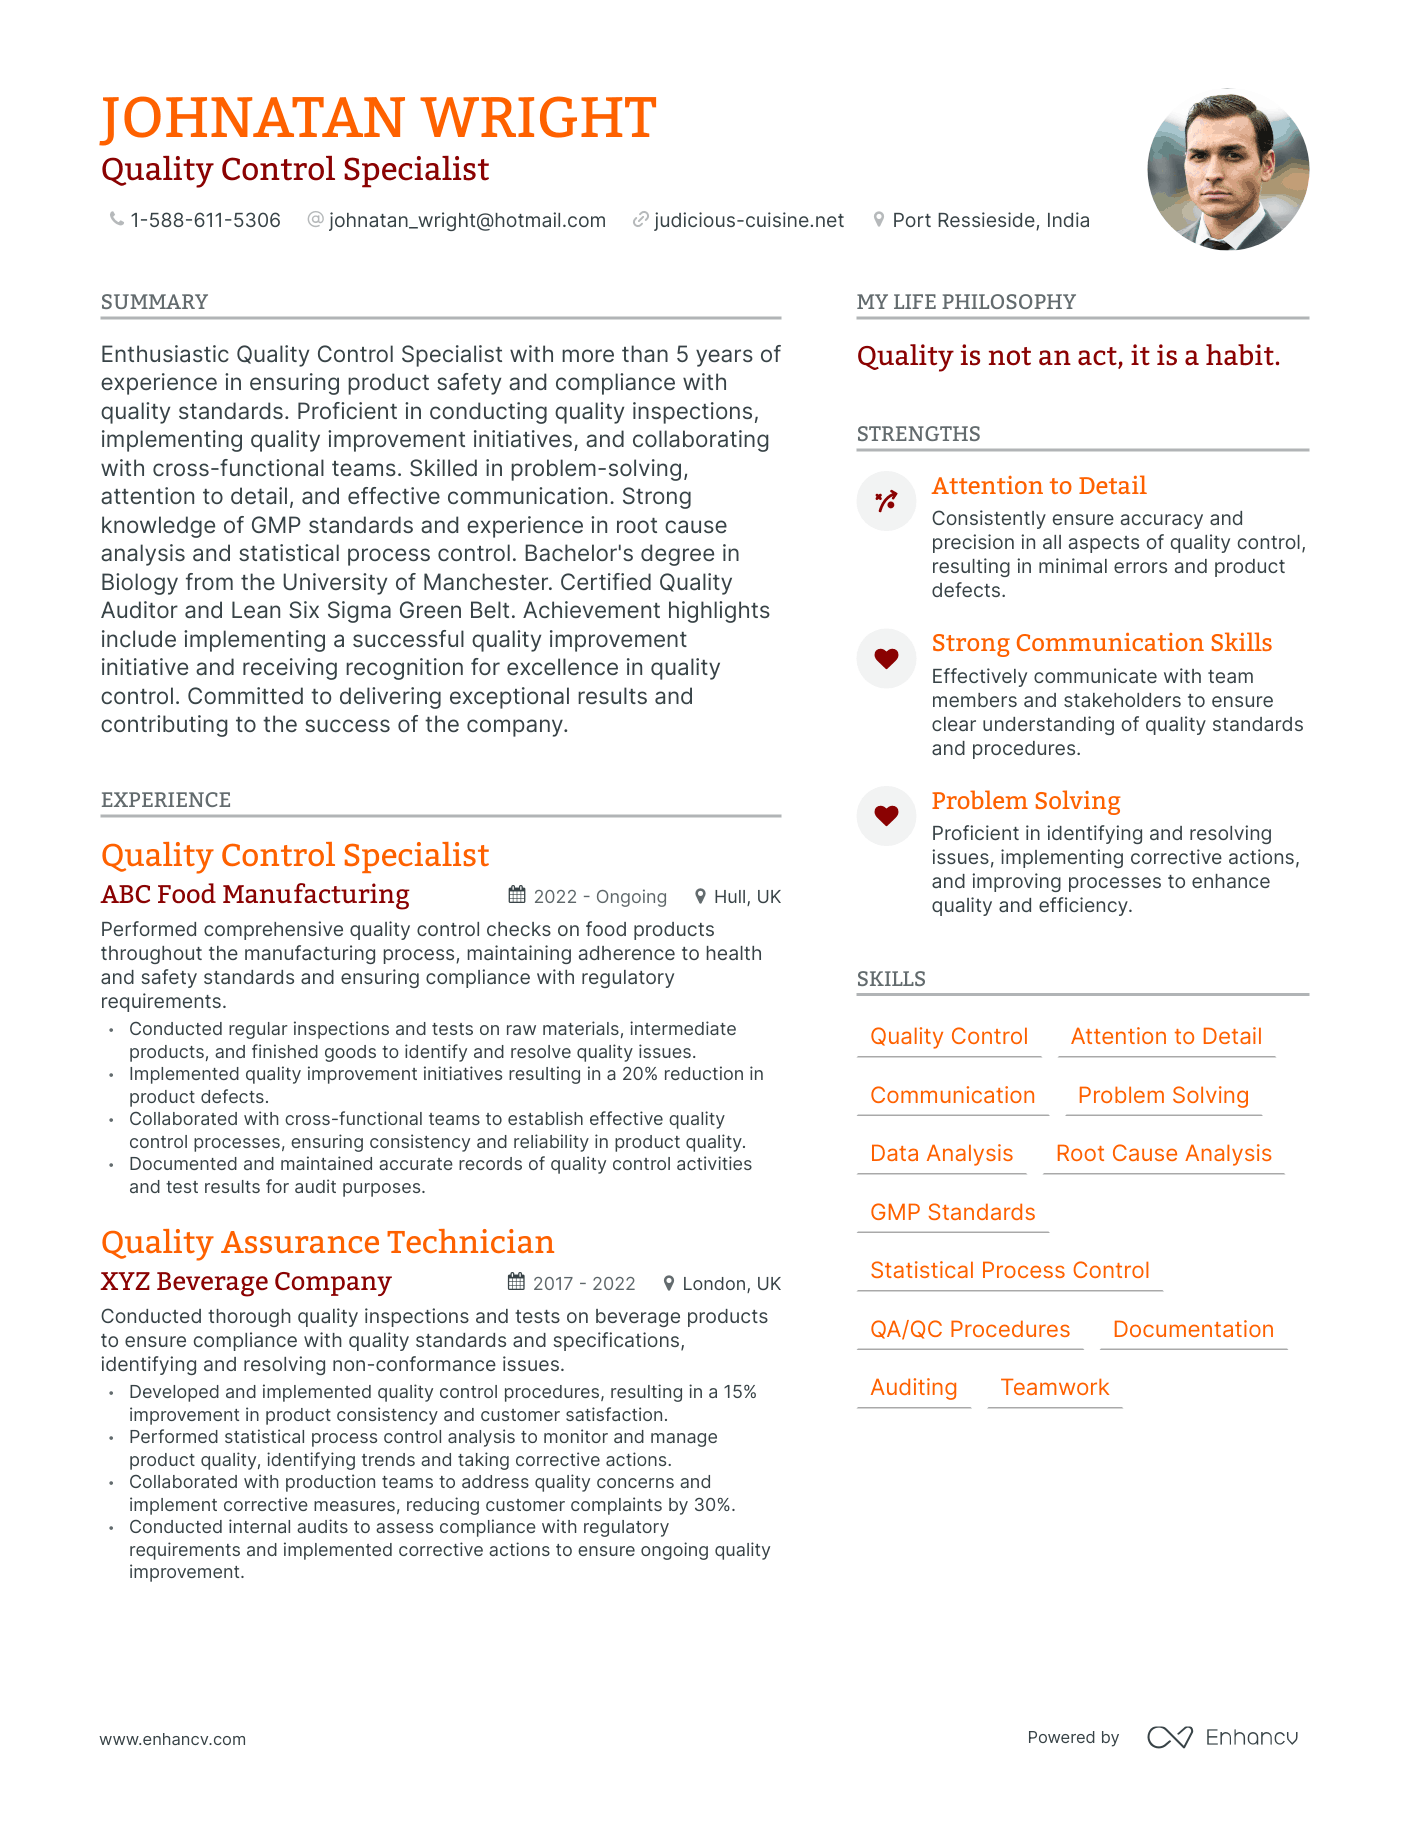 Quality Control Specialist resume example